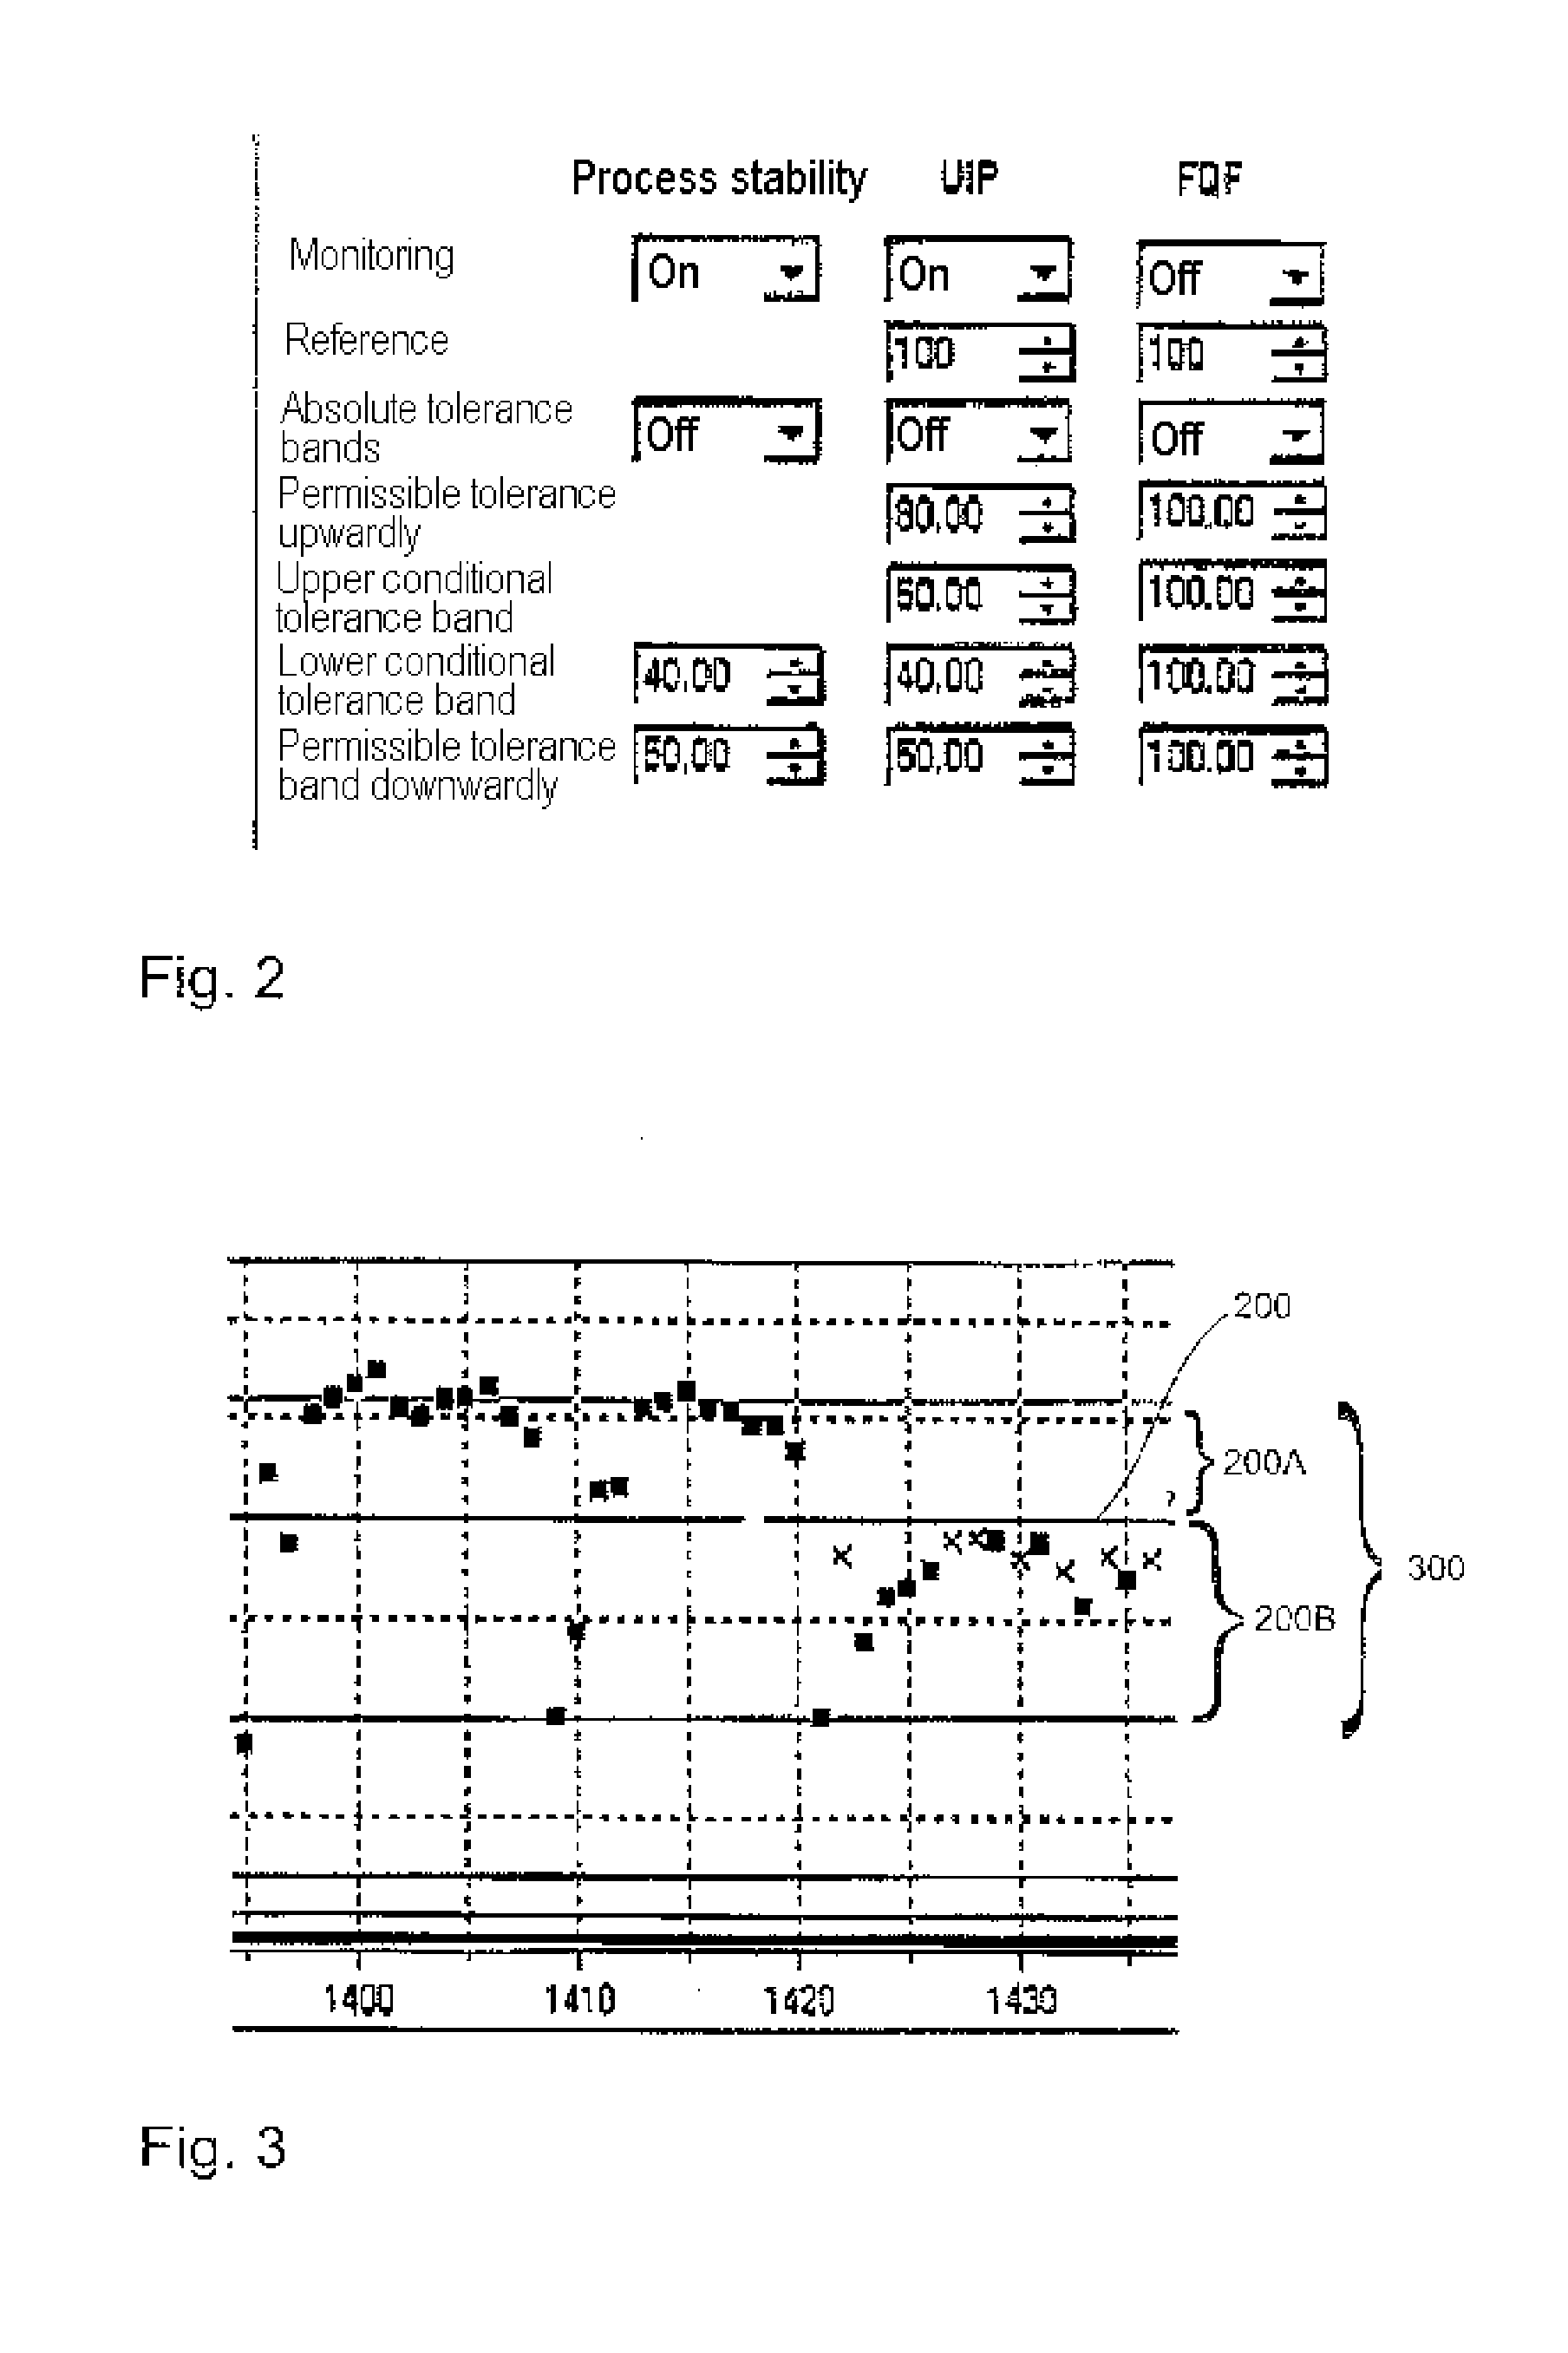 Method for Monitoring and Controlling a Quality of Spot Welds